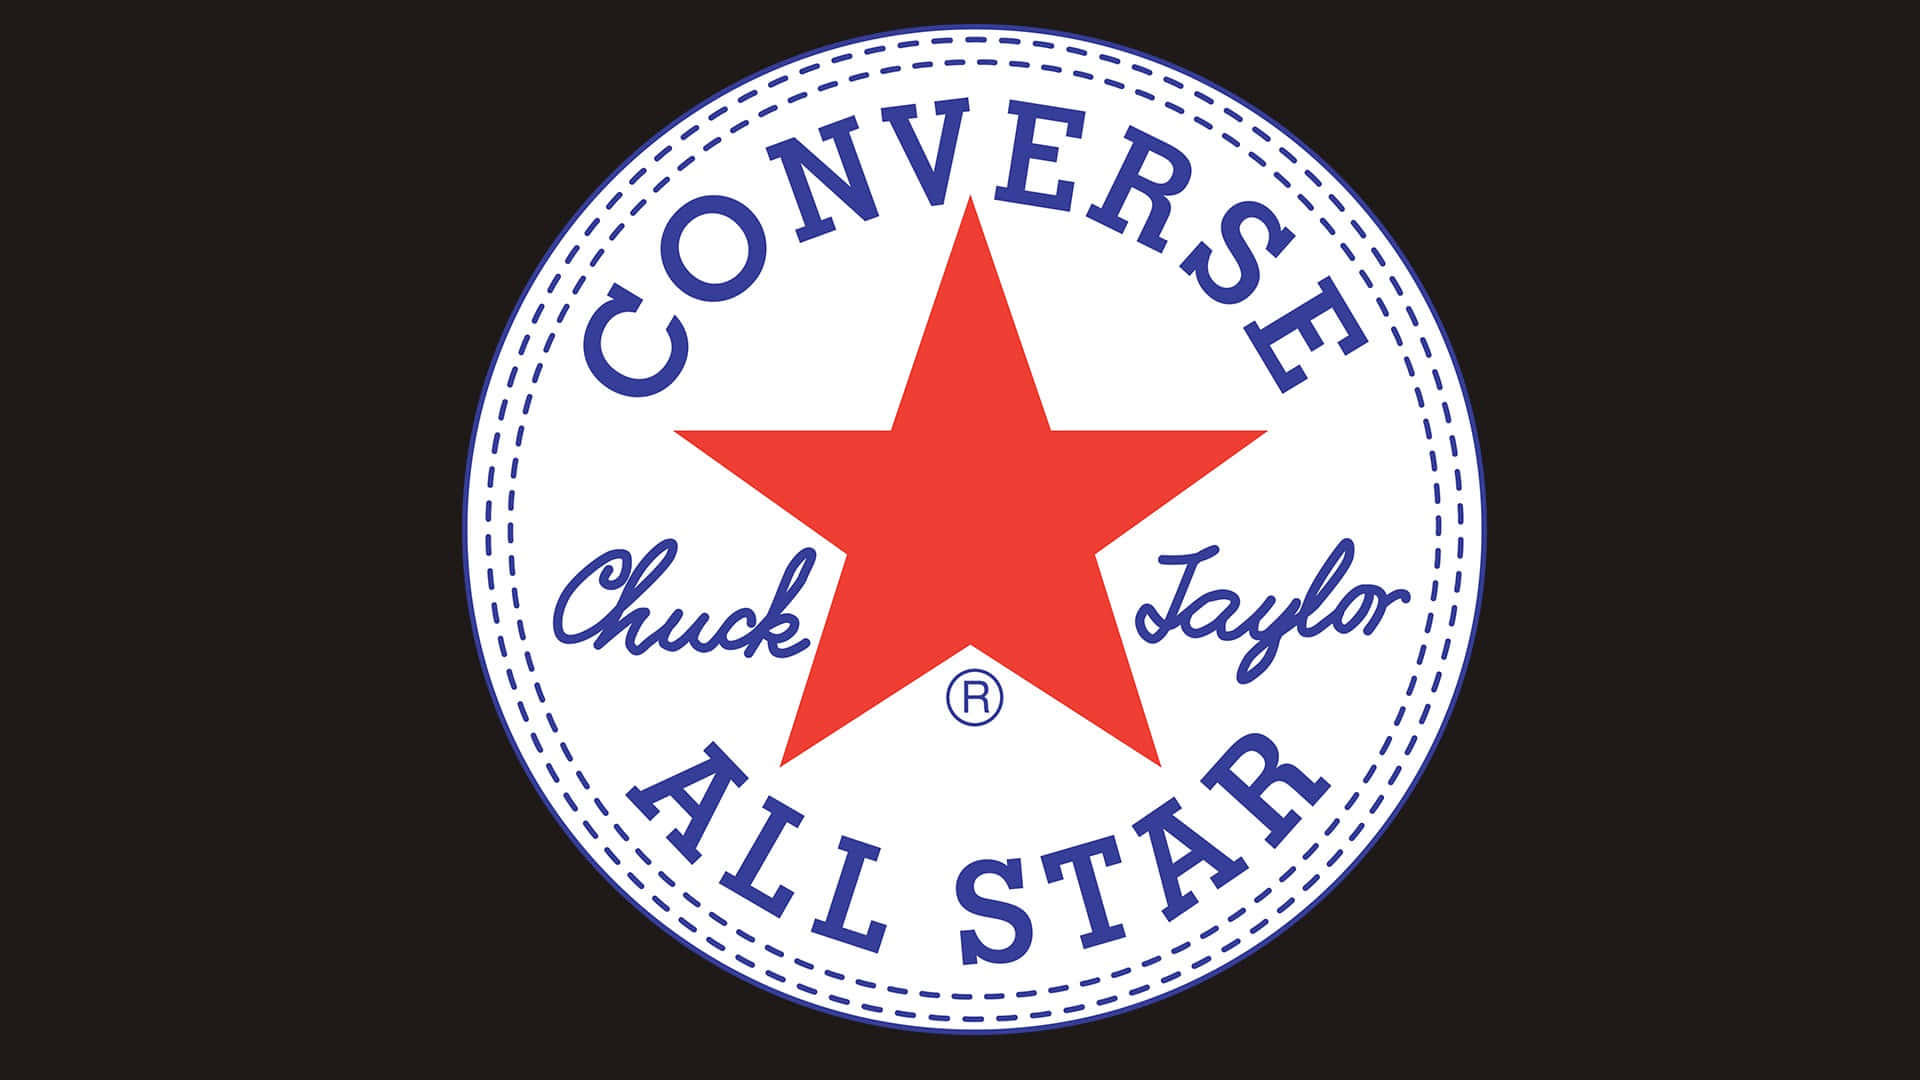 Download Converse Logo With Star On Black Background | Wallpapers.com